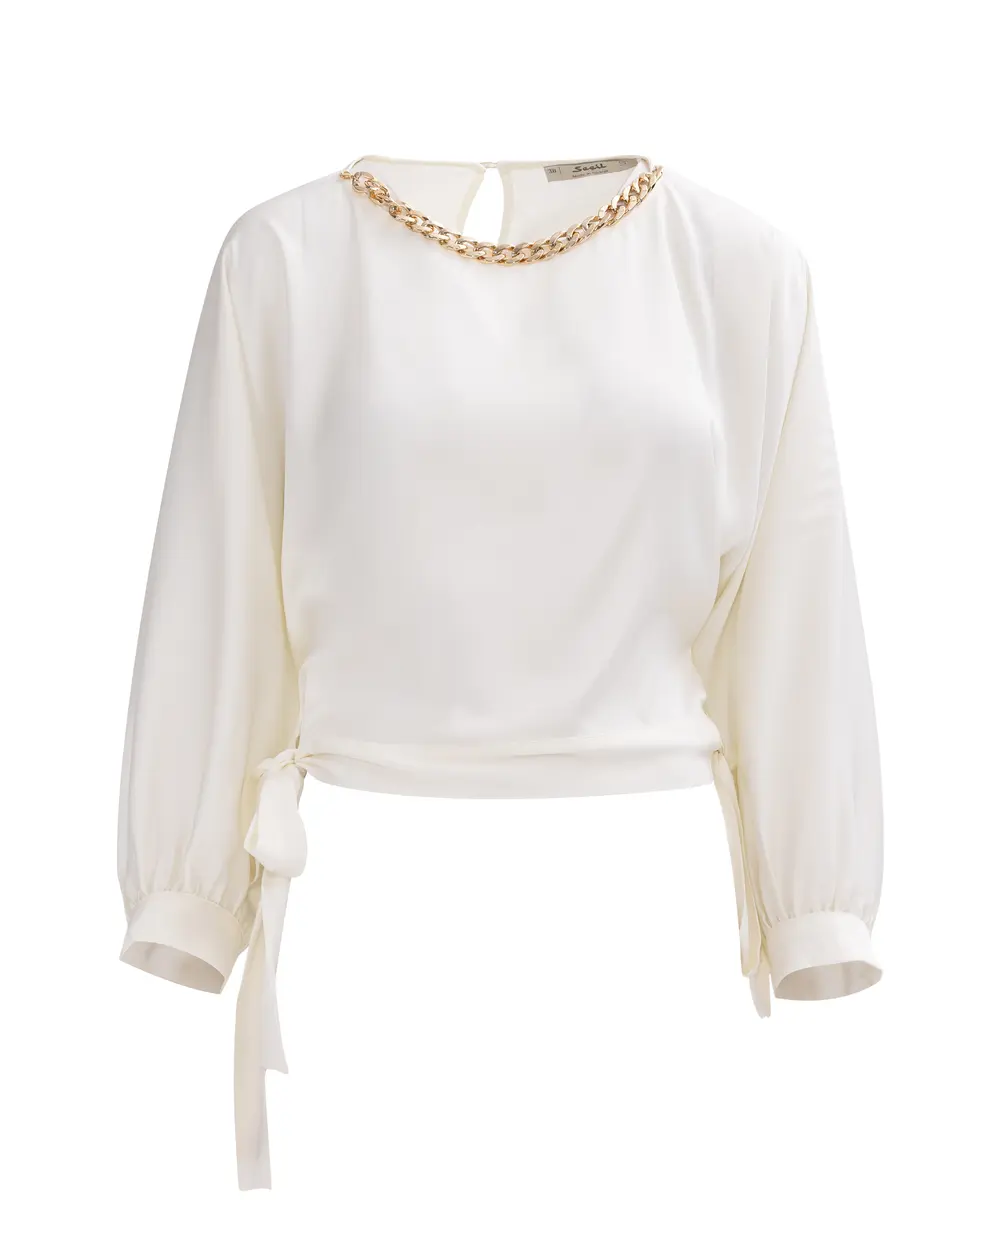 Waist Length Blouse with Chain Accessories